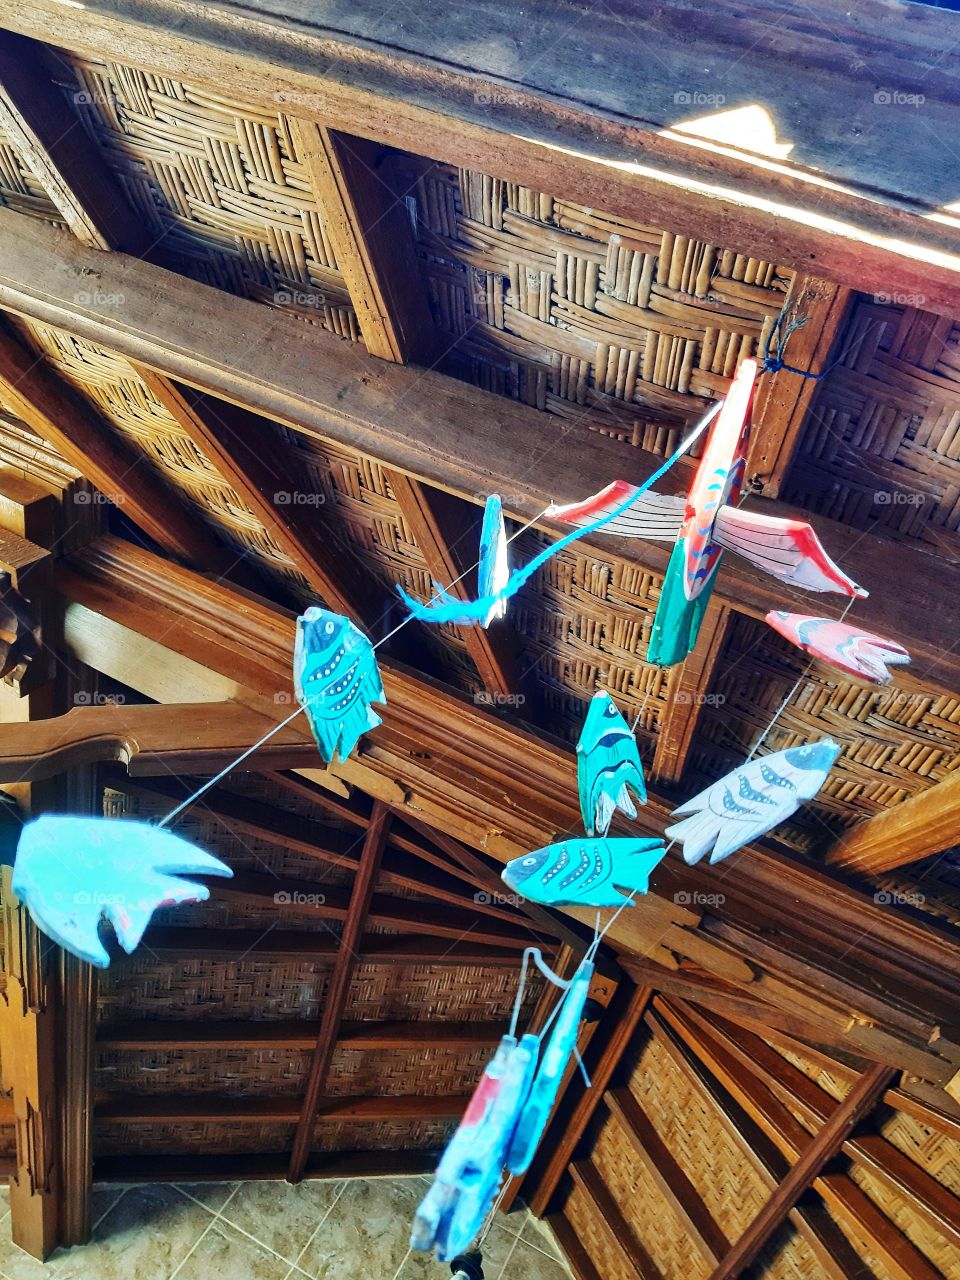 The fish-shaped colorful toy which is hanged on the brown wooden ceilings